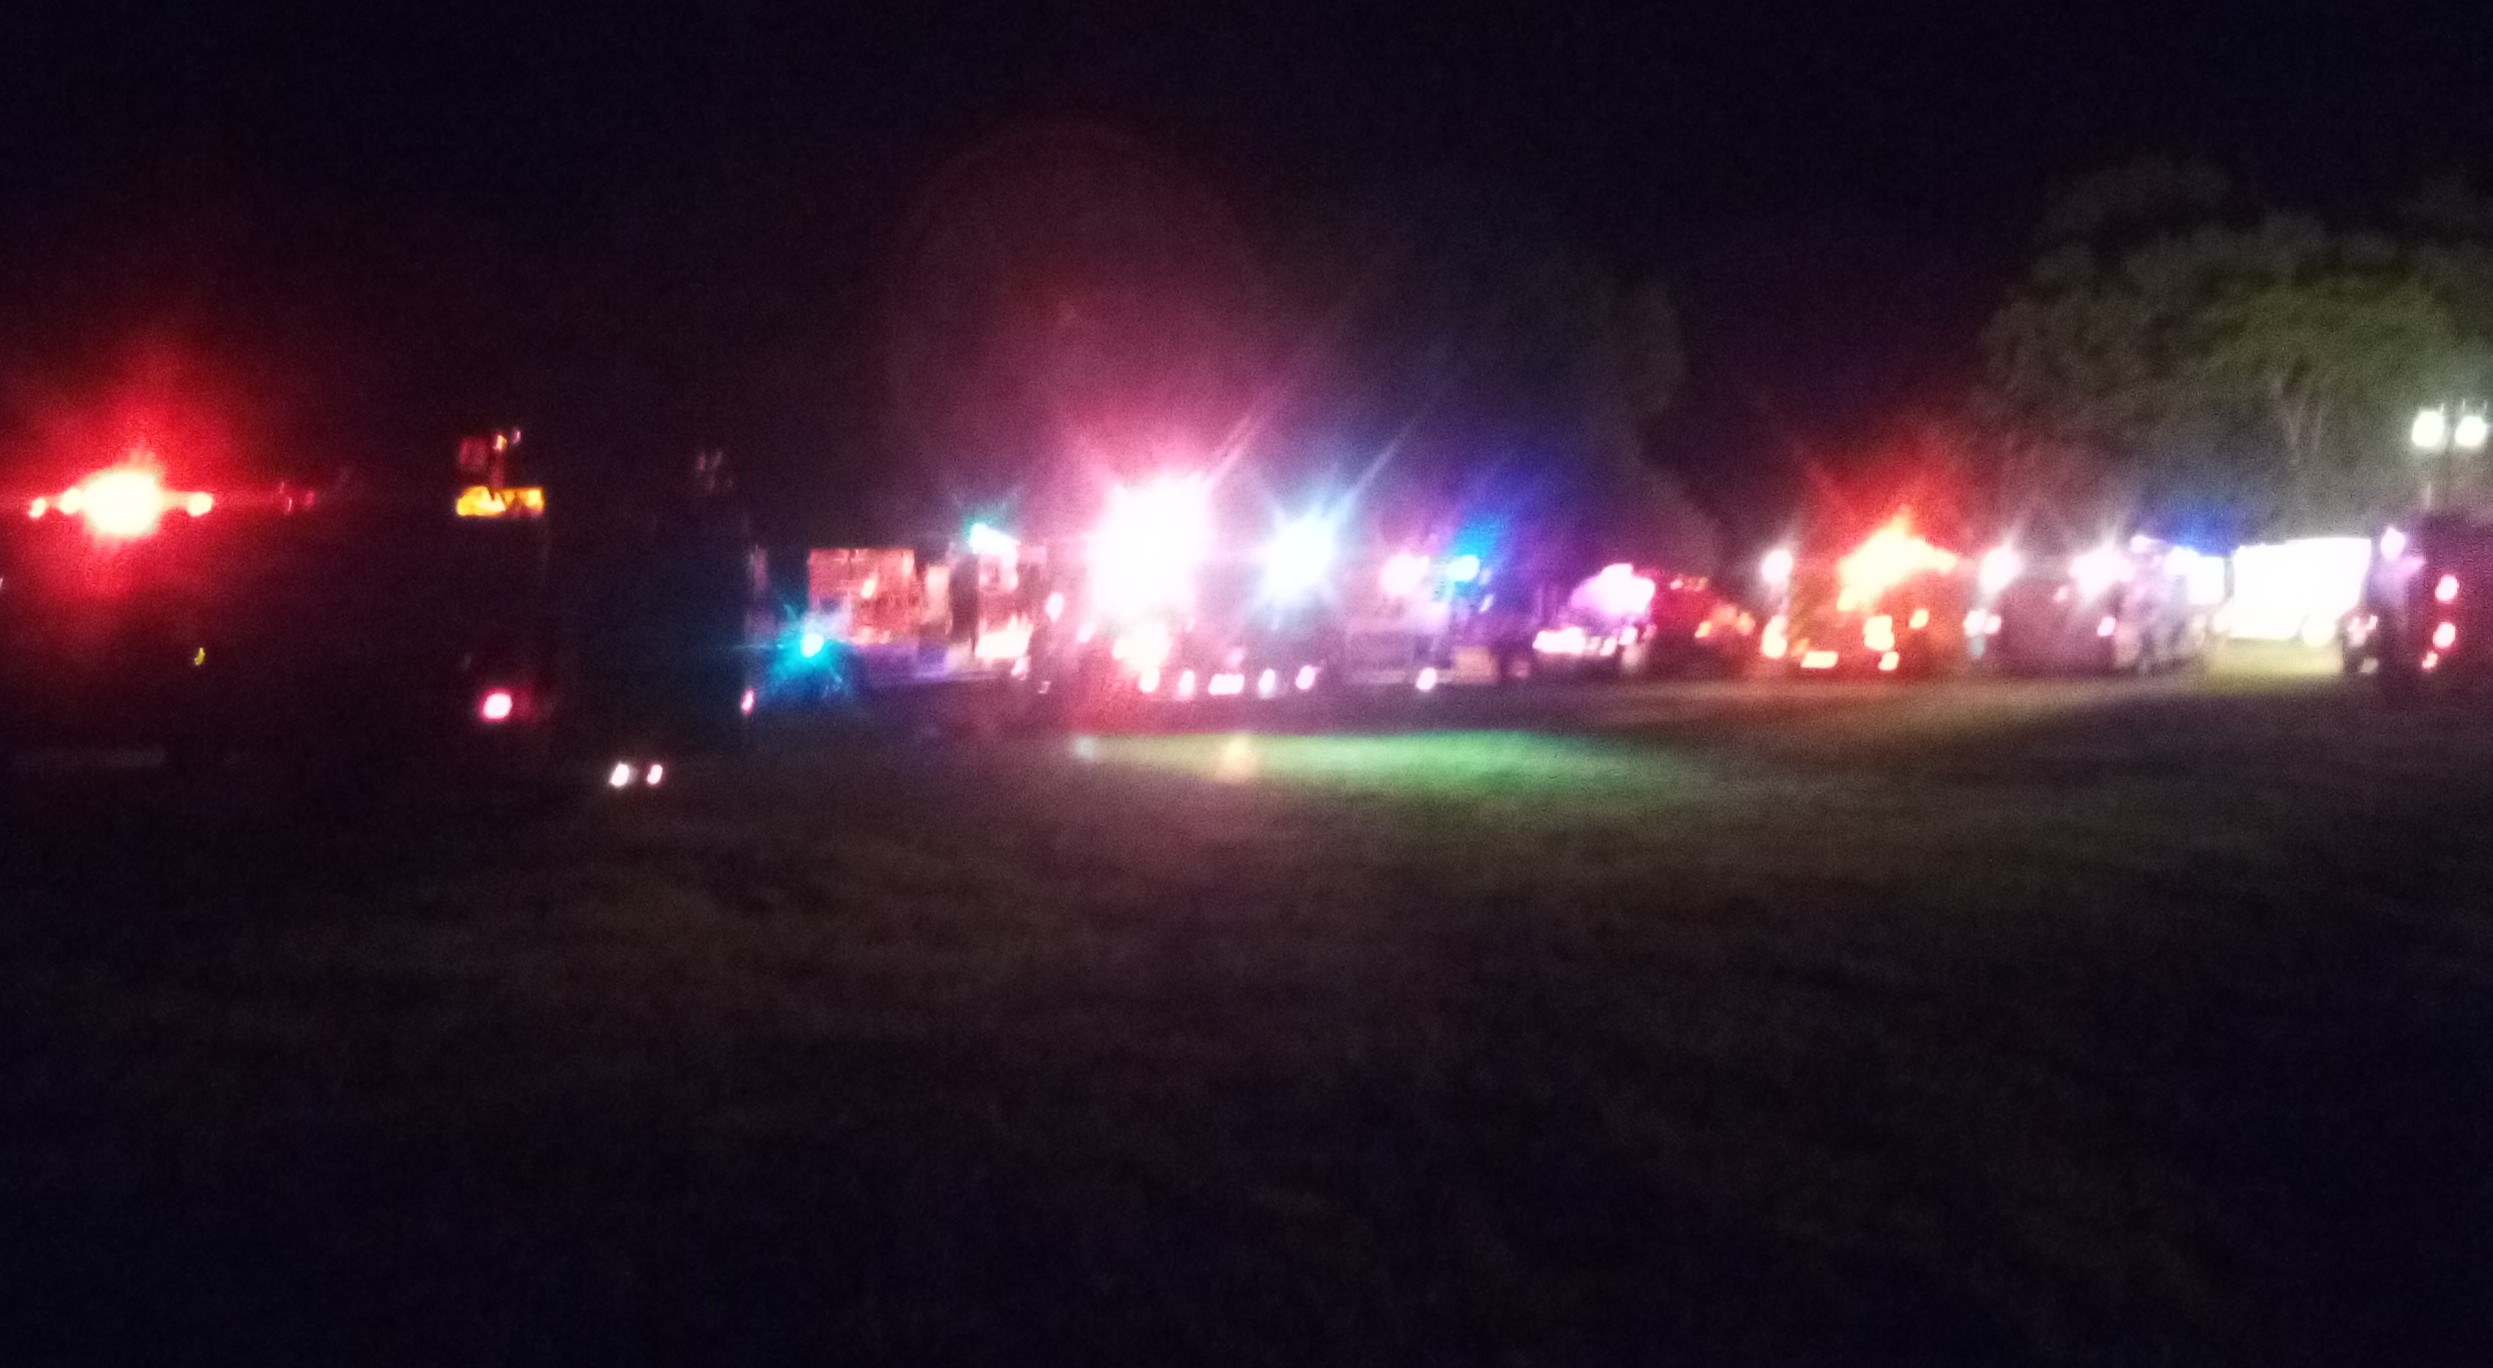 UPDATED: Fire Departments Respond to Fire at Chaumette Vineyard and Winery